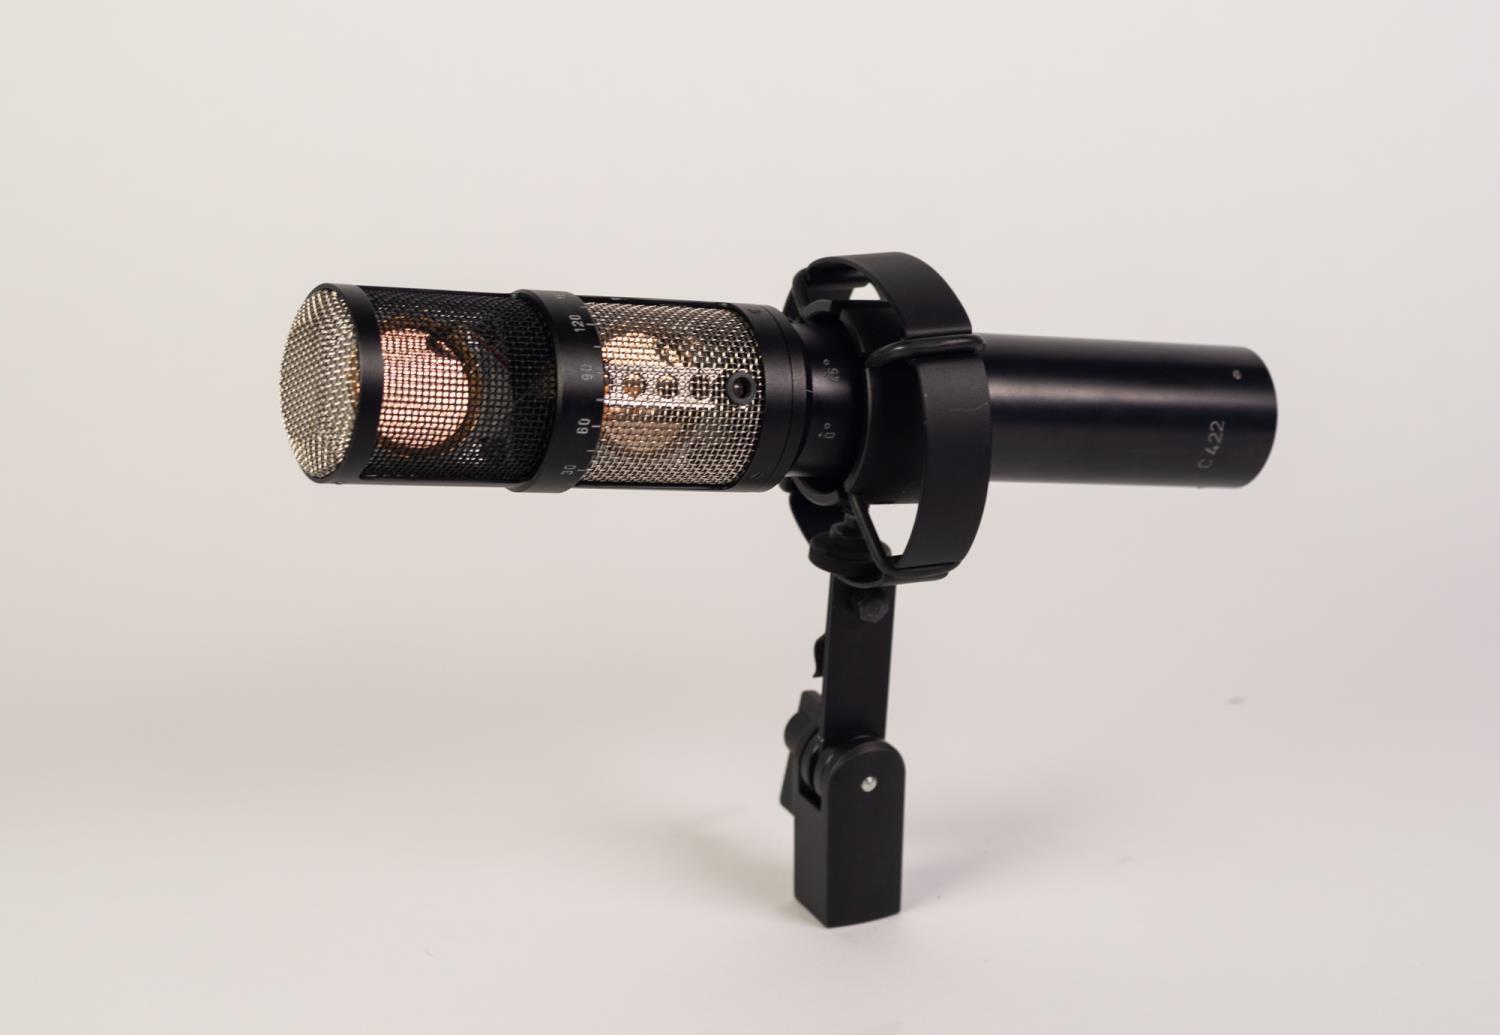 CIRCA 1986 AKG ACOUSTICS MICROPHONE, model C 422, WITH EXTRAS including microphone mount, miclead - Image 2 of 3